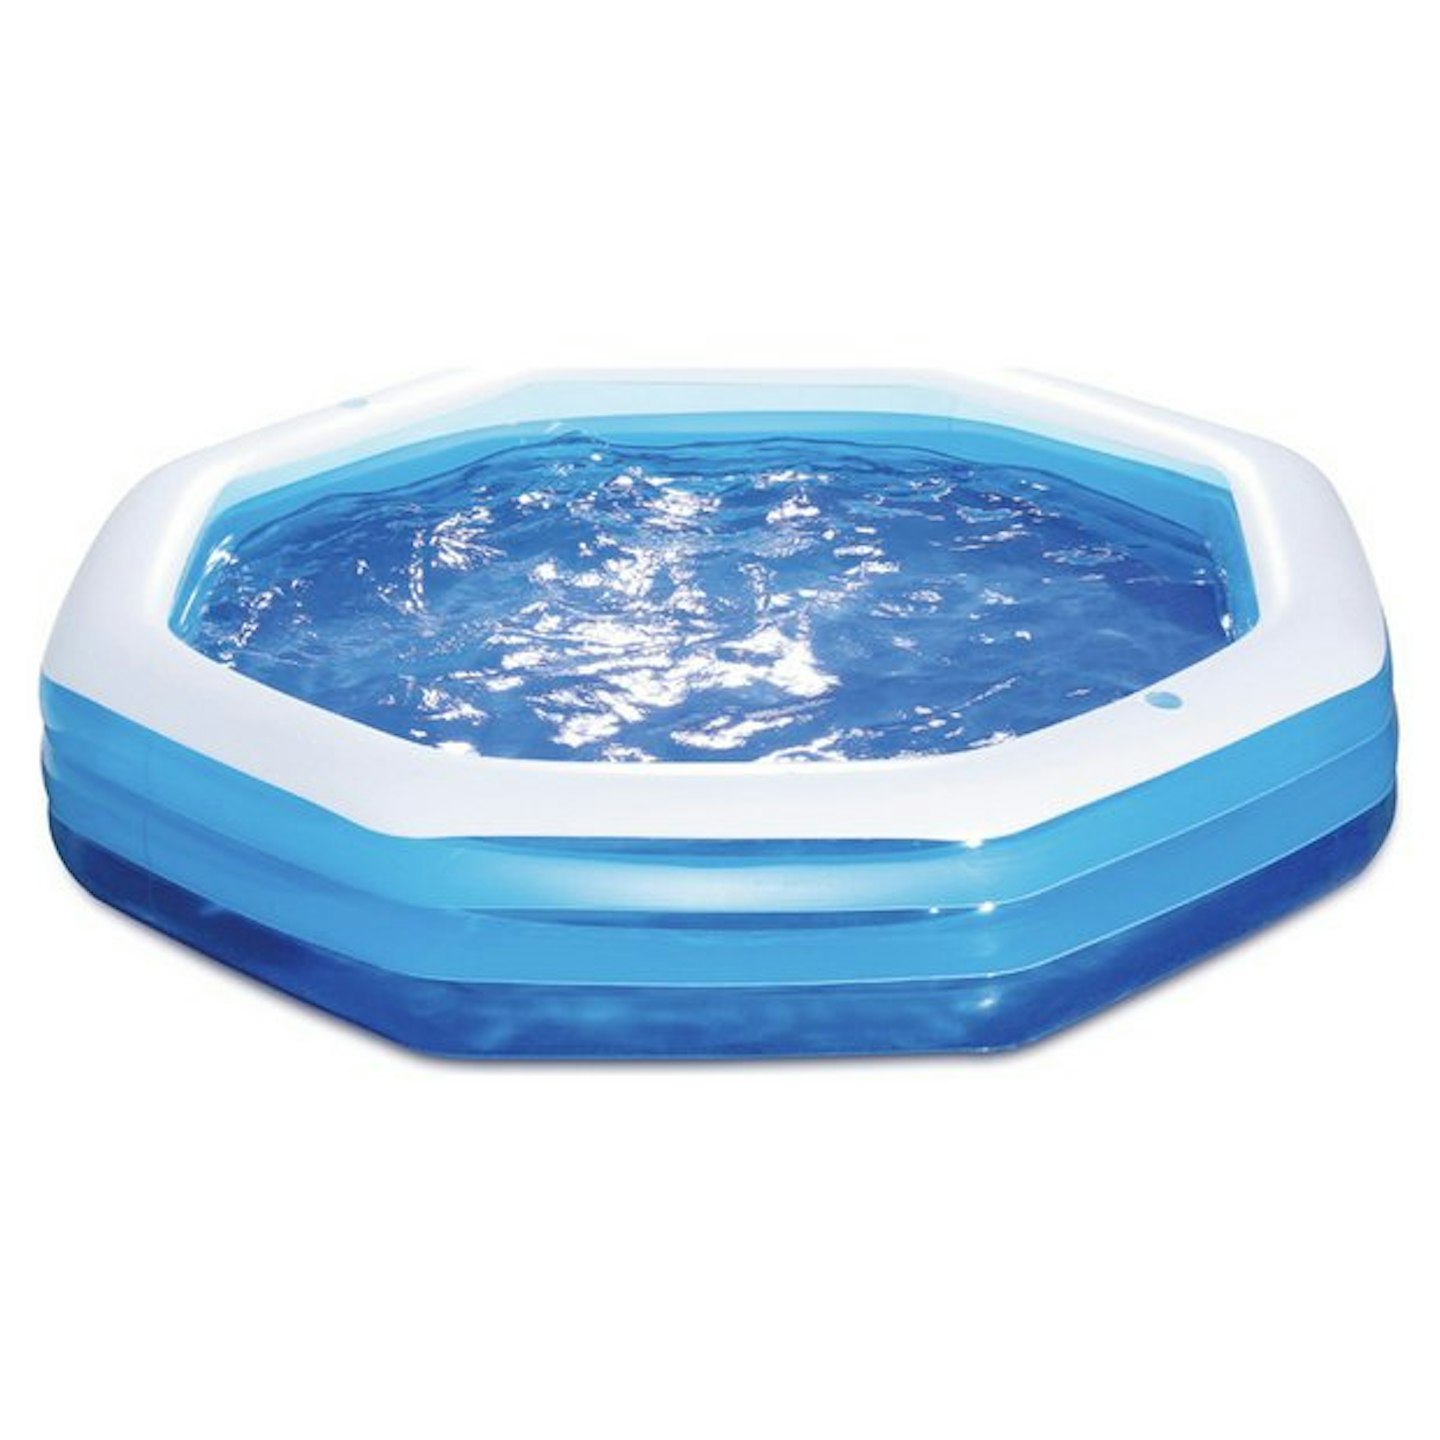 Summer Escapes, 9ft Octagonal Family Paddling Pool - 1318L, £50